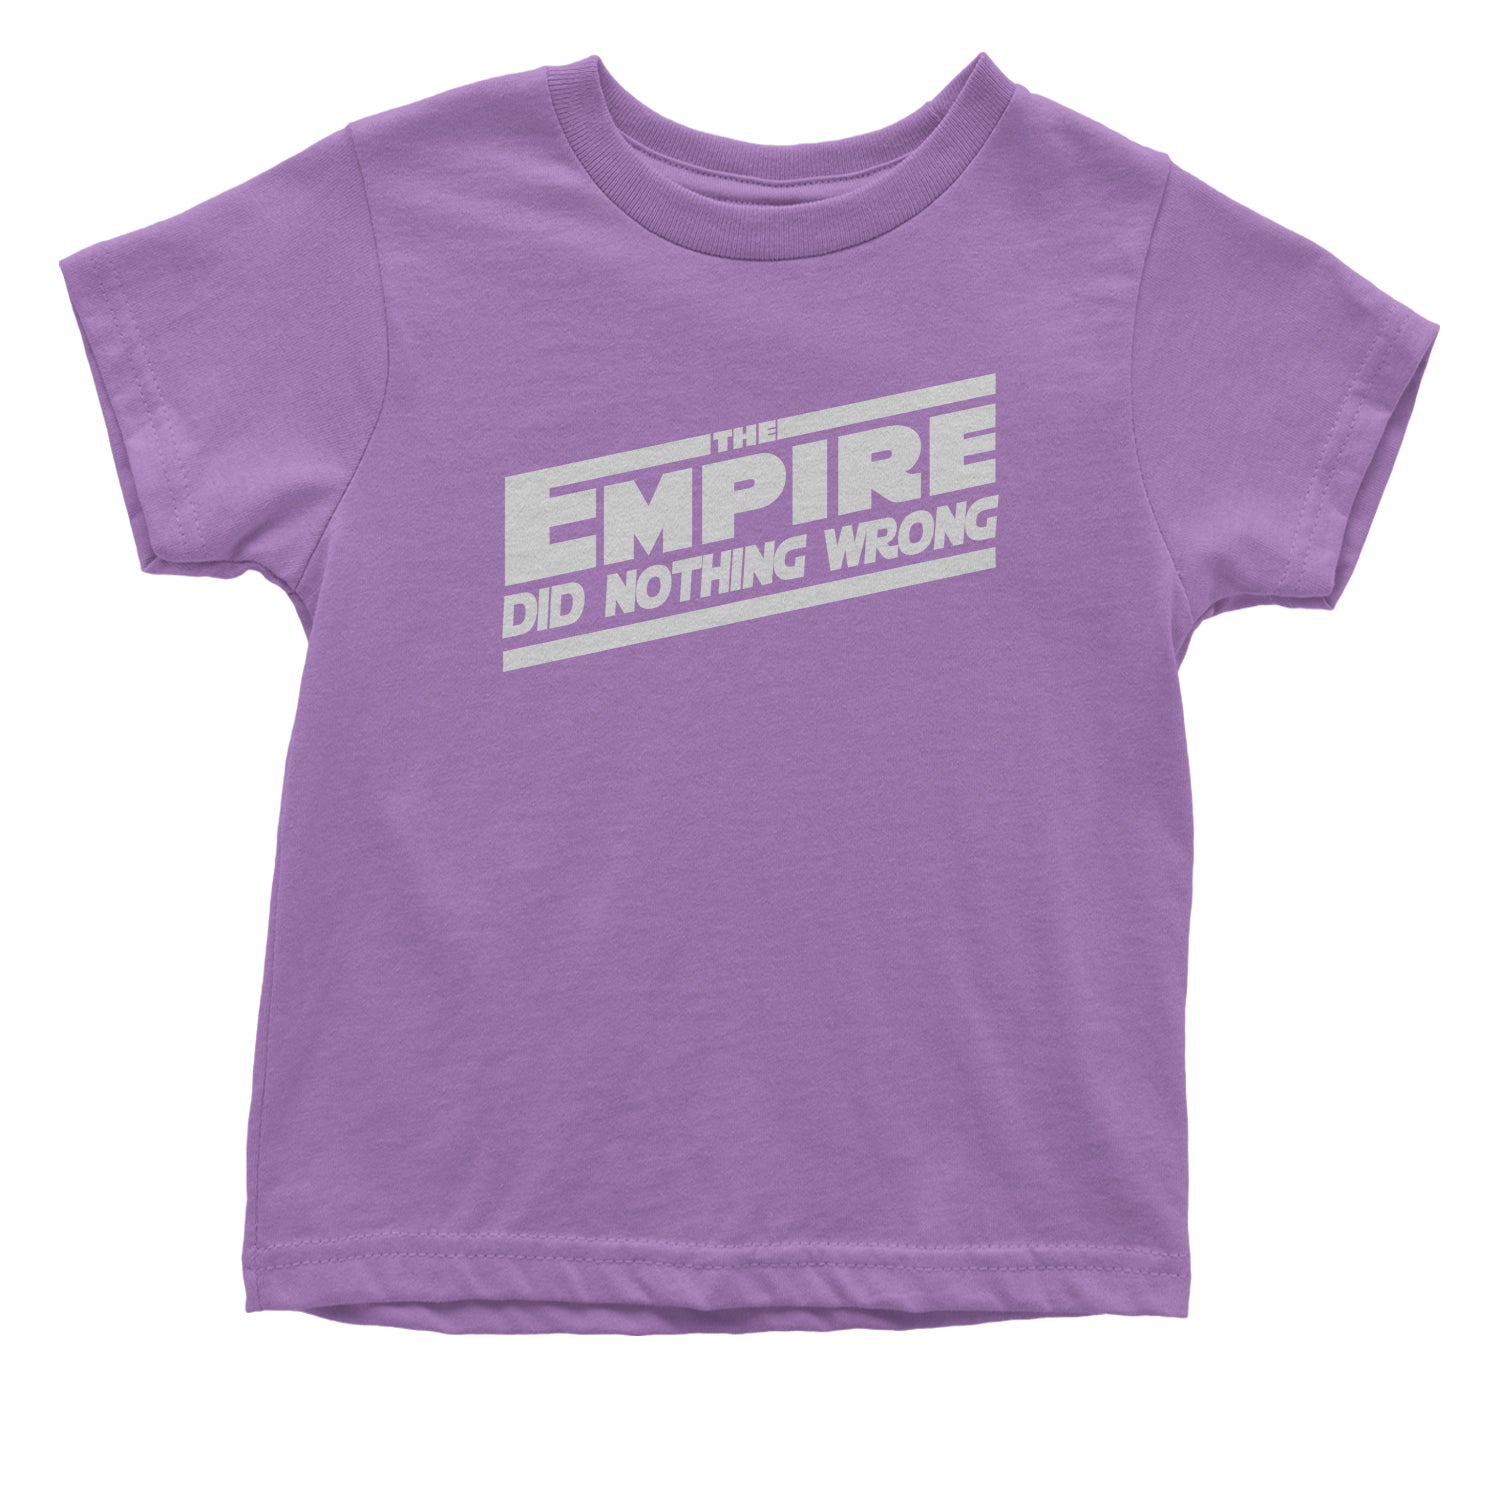 The Empire Did Nothing Wrong Toddler T-Shirt rebel, reddit, space, star, storm, subreddit, tropper, wars by Expression Tees